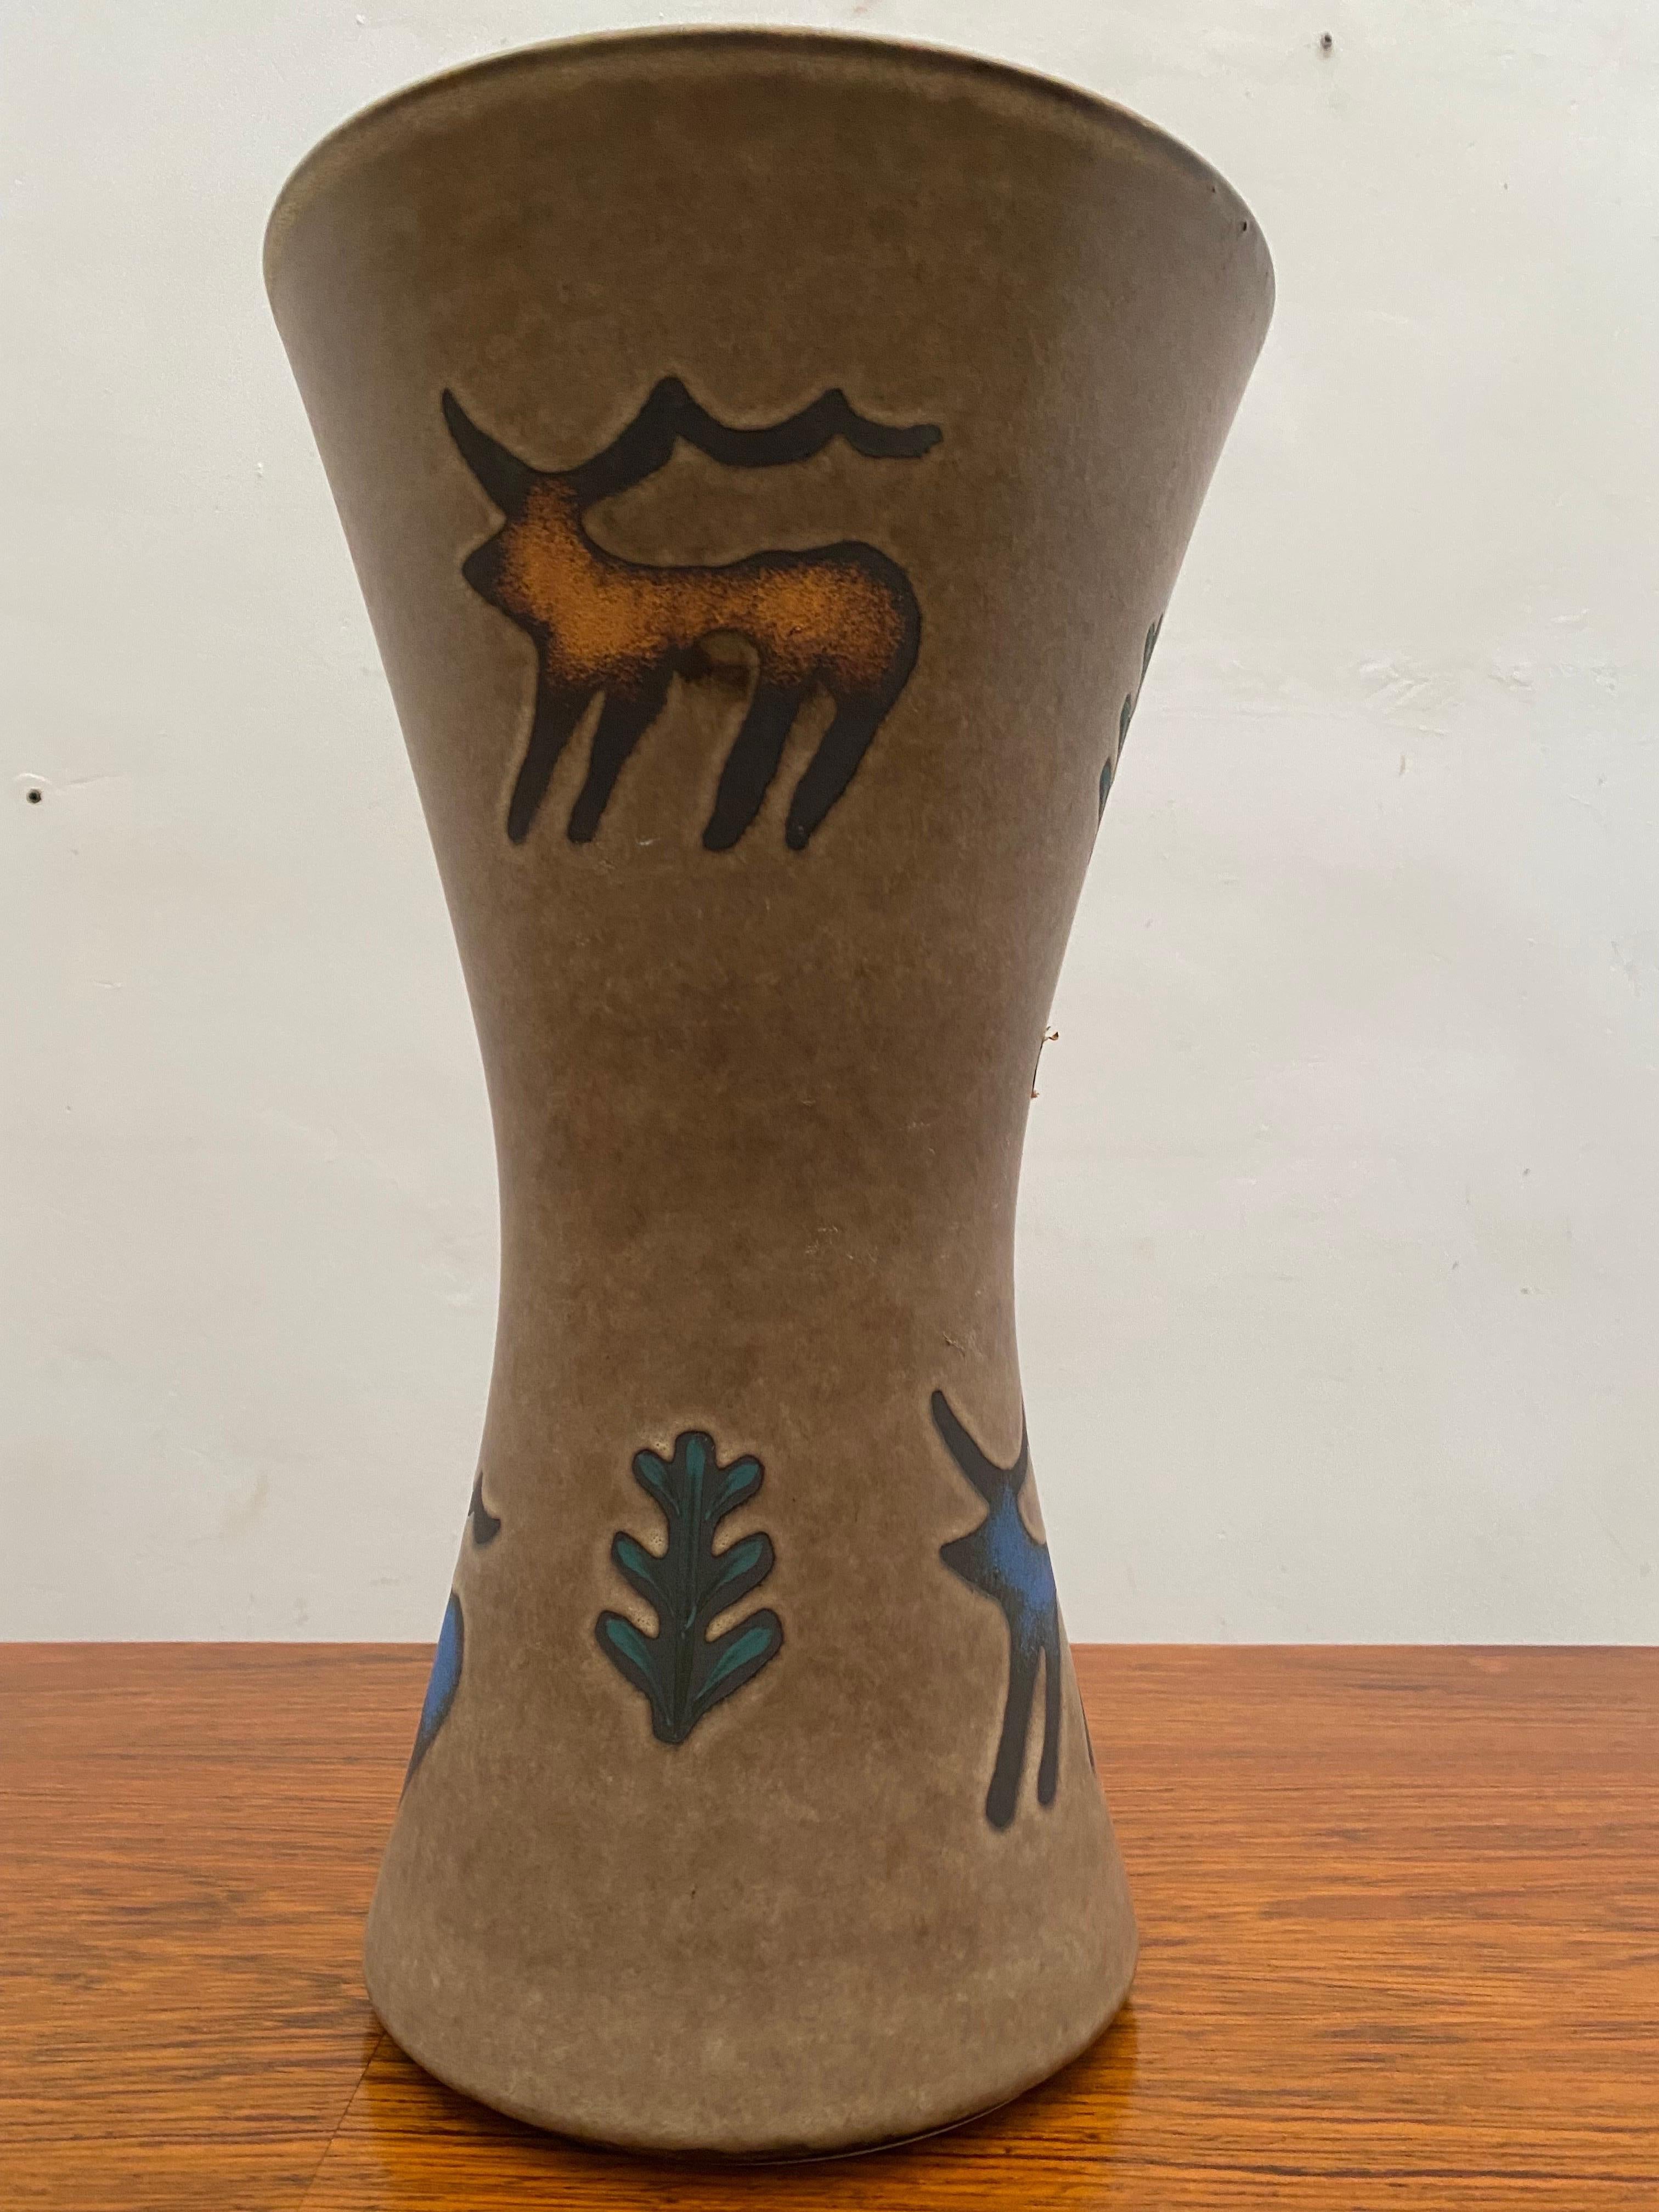 A Large ceramic vase designed with pre-historical animals in the colors blue and orange manufactured in Germany by Hohr in the 1960s in a very good condition, signed on the bottom with number 1305/40 and Germany. Beautiful vase, floor-vase for your